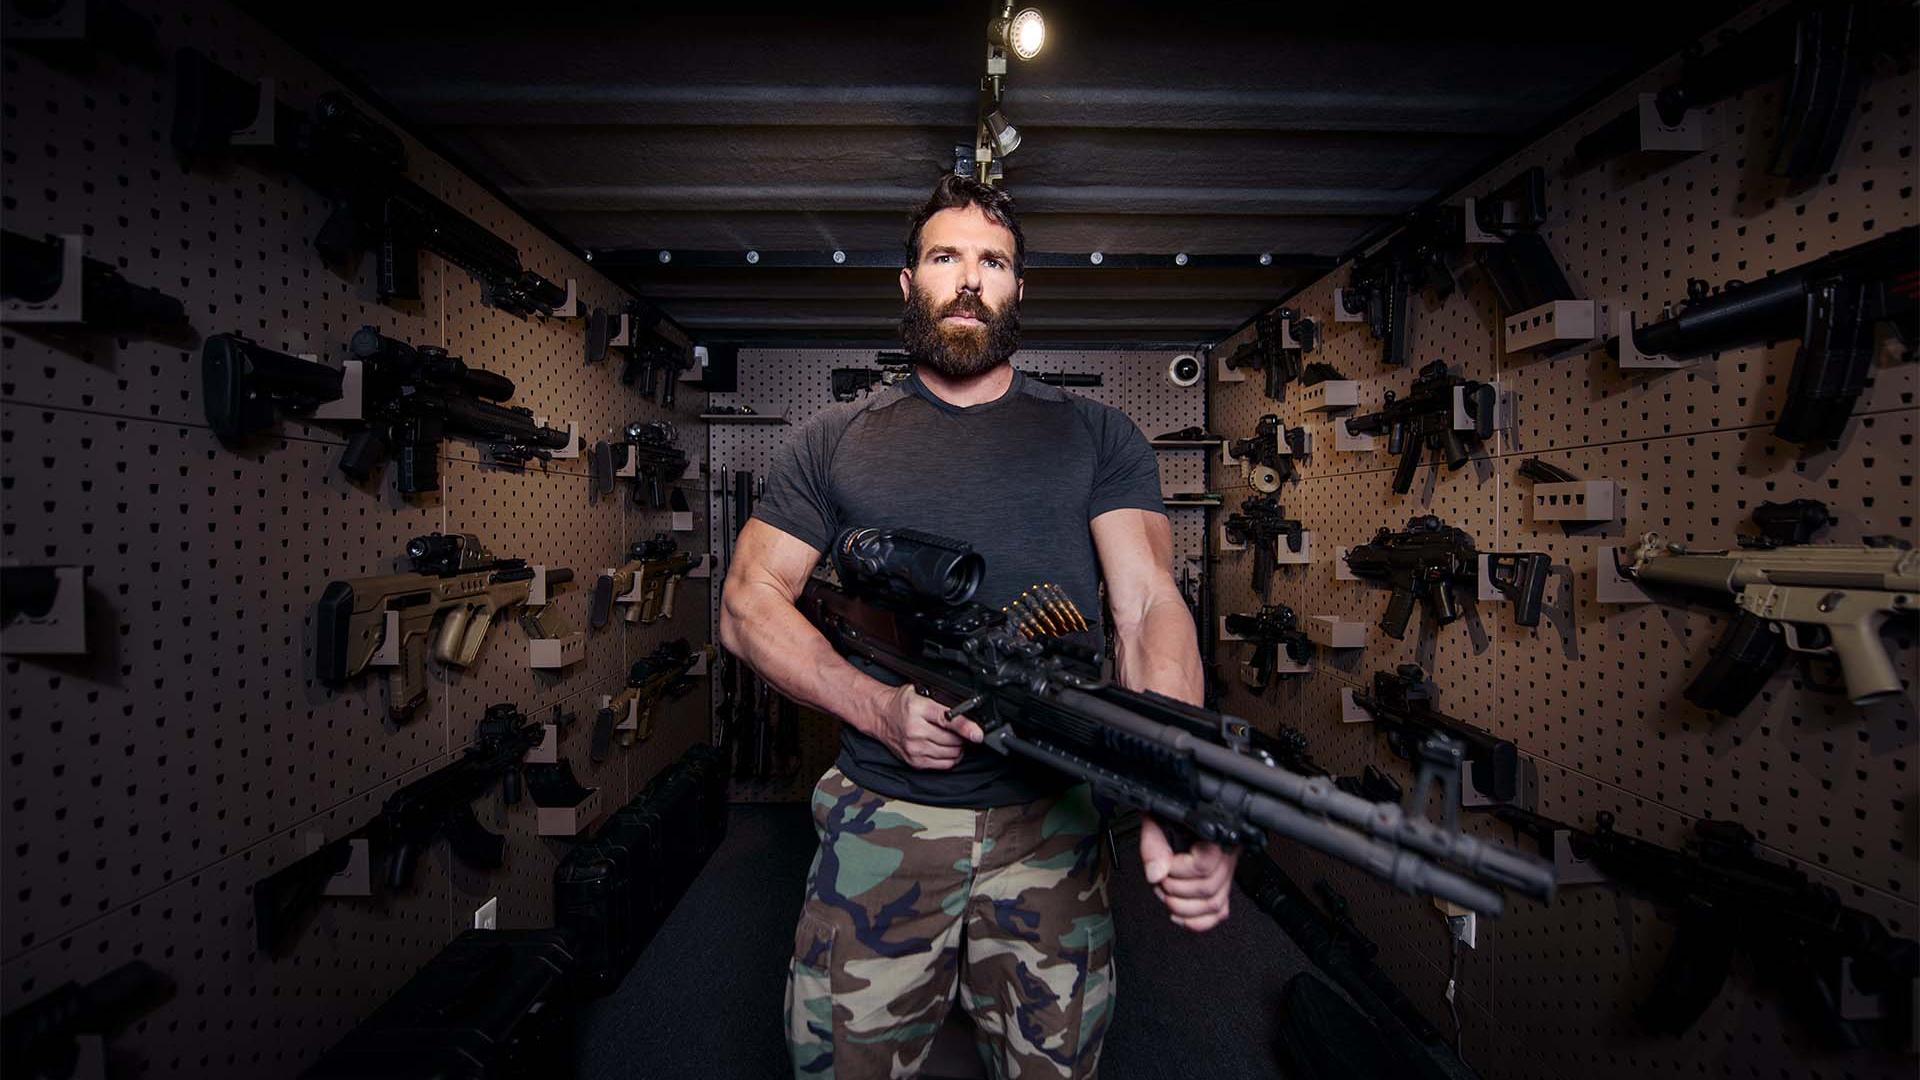 Dan Bilzerian photographed by Dustin Snipes for Square Mile magazine